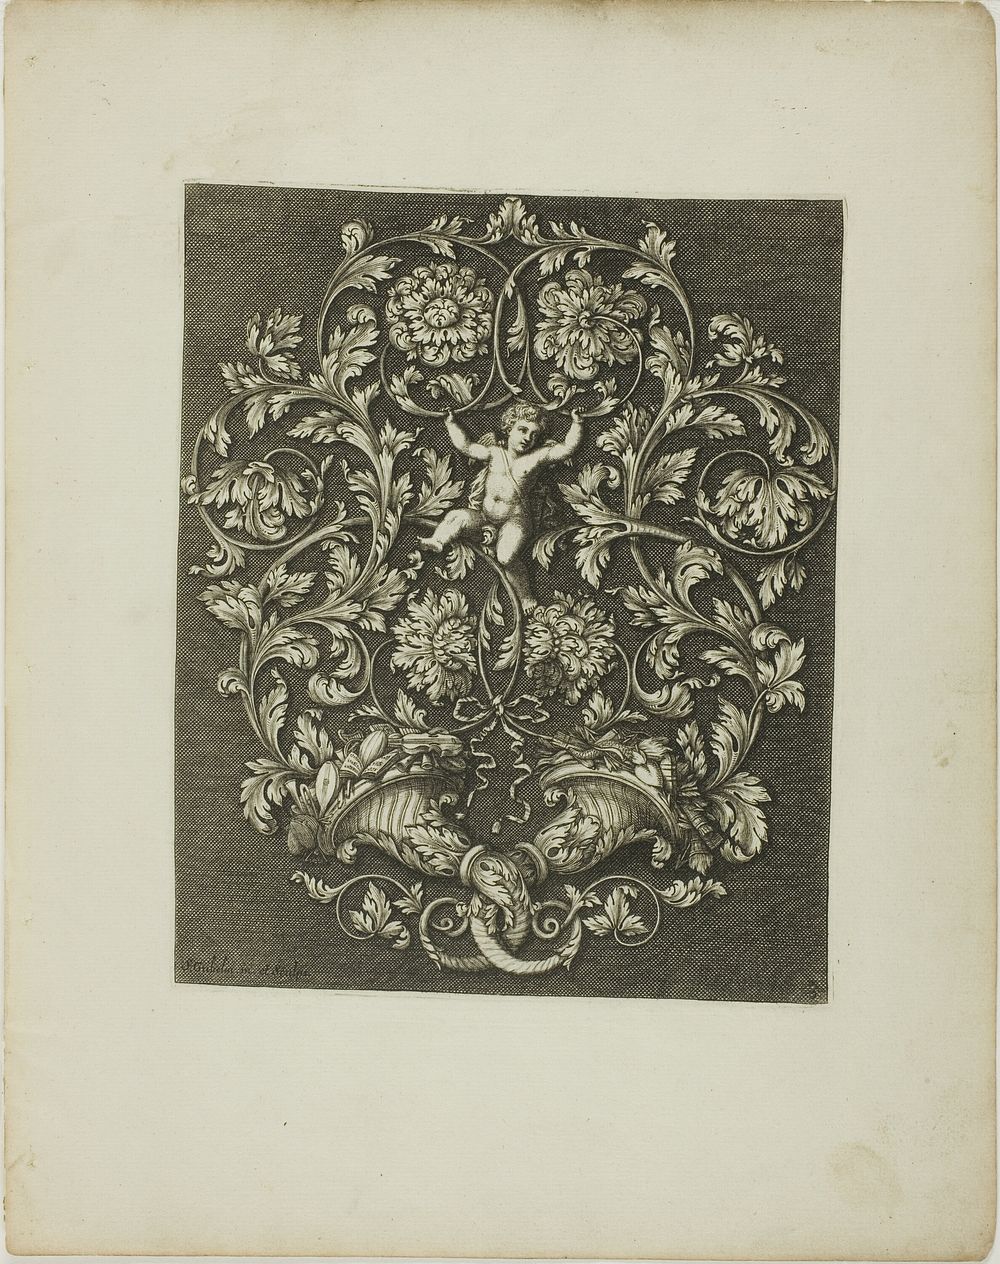 Plate Three, from A New Book of Ornaments by Simon Gribelin, II